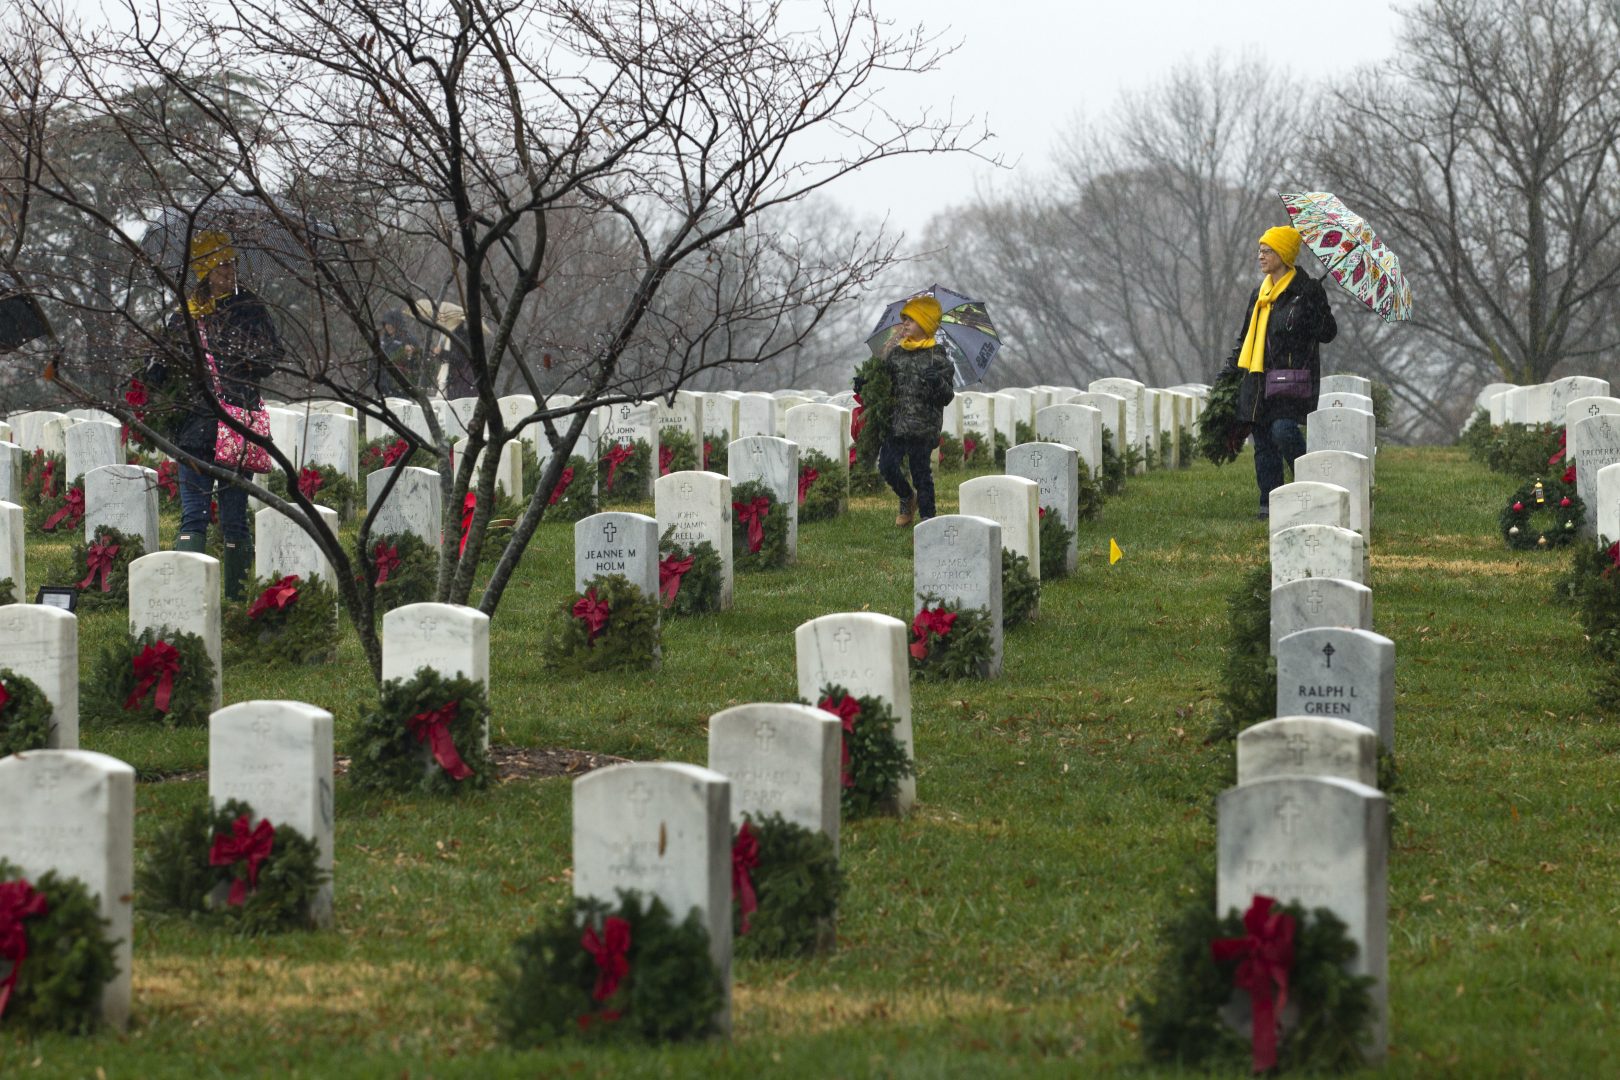 Volunteers help to lay holiday wreaths at graves at Arlington National Cemetery in Arlington, Va., Saturday Dec. 15, 2018, during Wreaths Across America Day. Wreaths Across America was started in 1992 at Arlington National Cemetery by Maine businessman Morrill Worcester and has expanded to hundreds of veterans' cemeteries and other locations in all 50 states and beyond. (AP Photo/Jose Luis Magana)